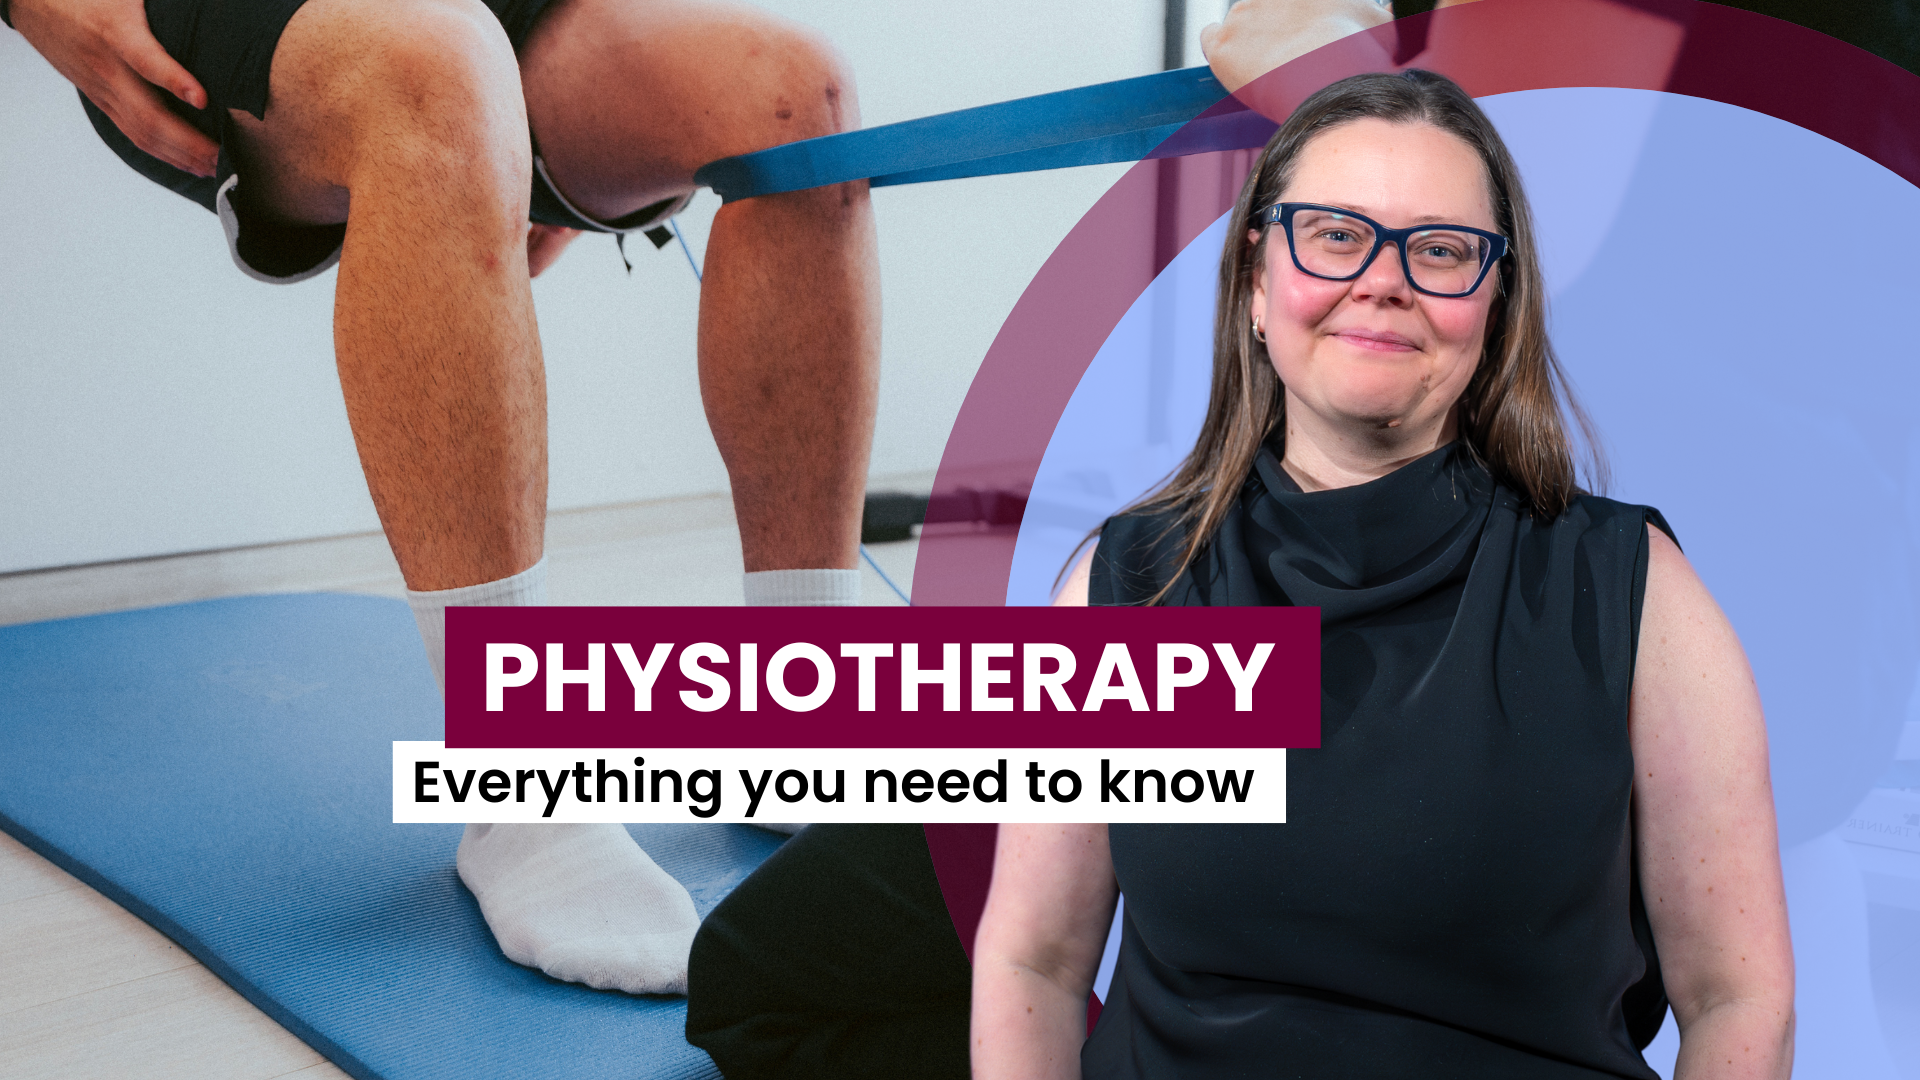 Composite image of Sarah Wojkowski (in the foreground) and a person receiving physiotherapy (in the background). Text: Physiotherapy: Everything you need to know.